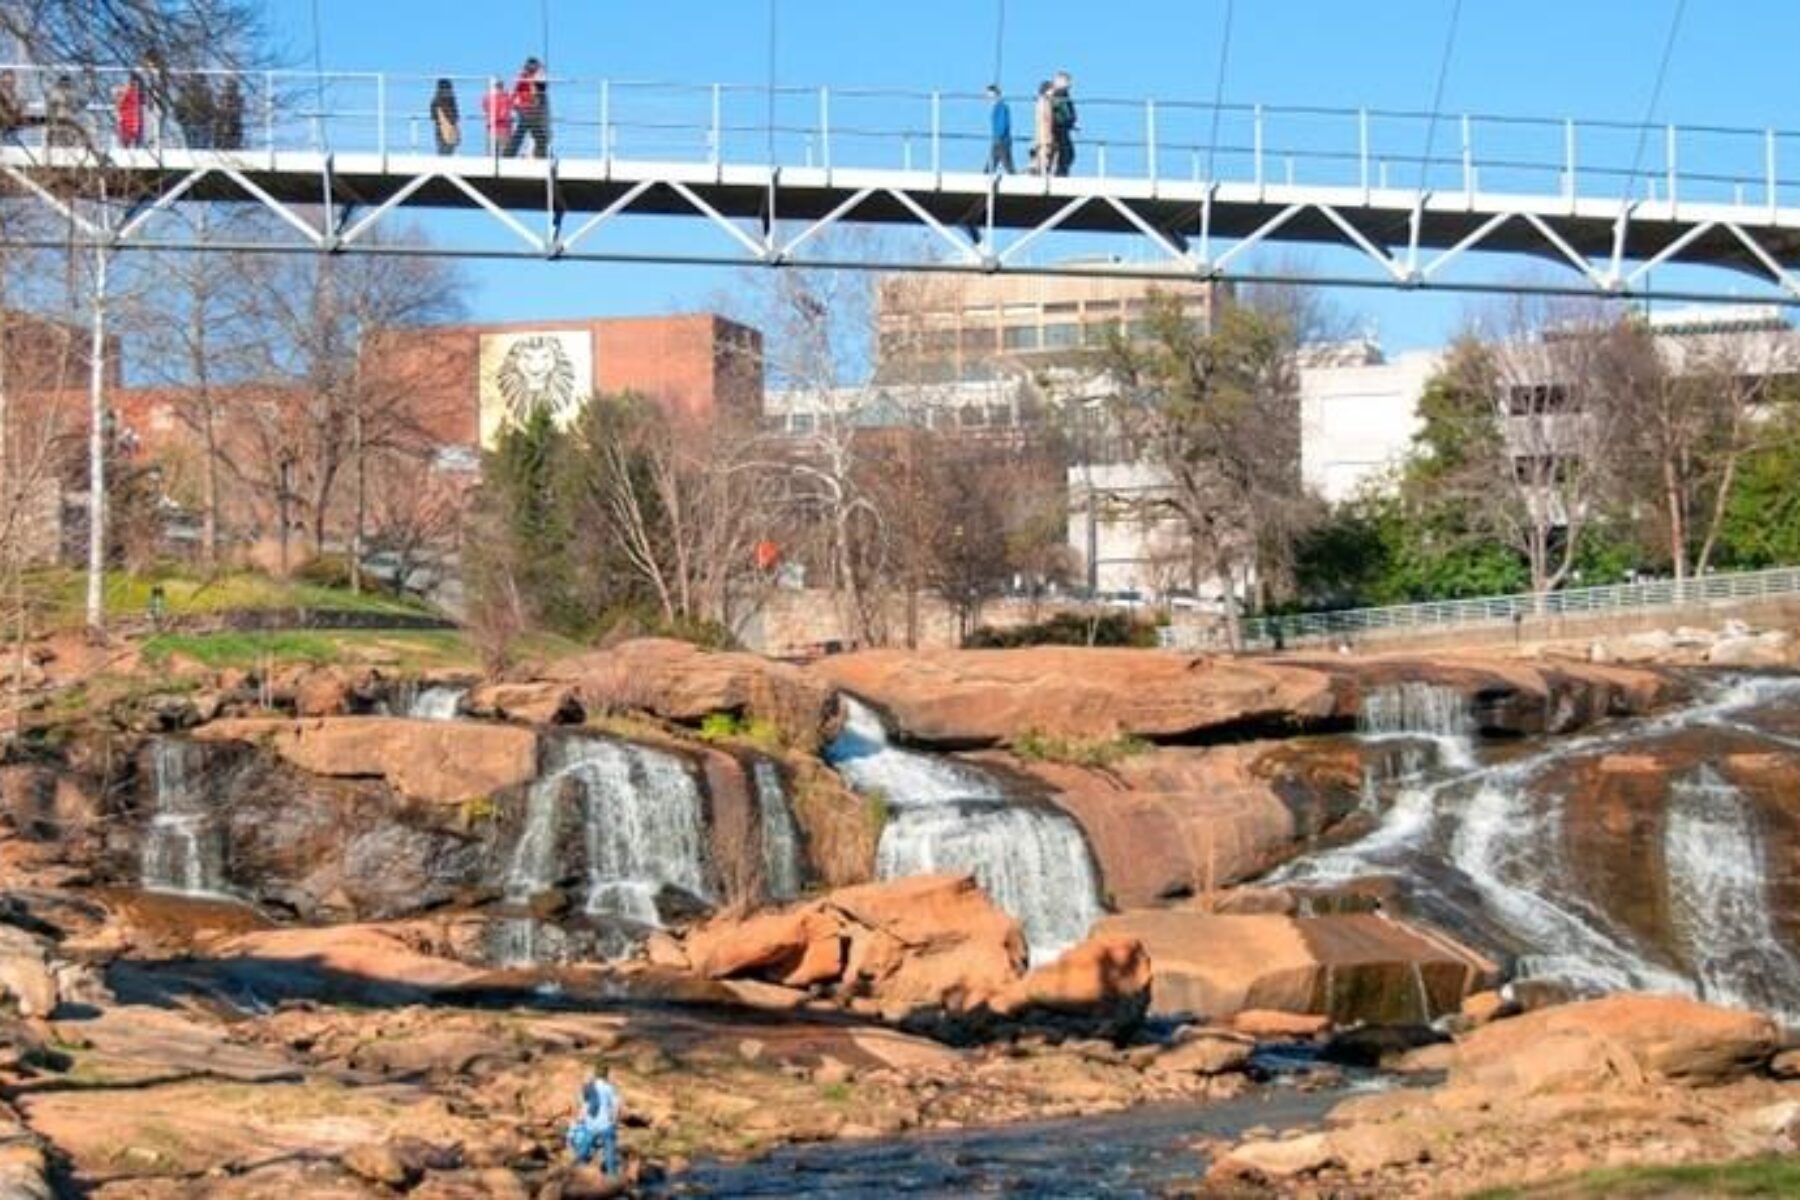 View of Liberty Bridge from the Swamp Rabbit Trail | Photo by Barry Peters